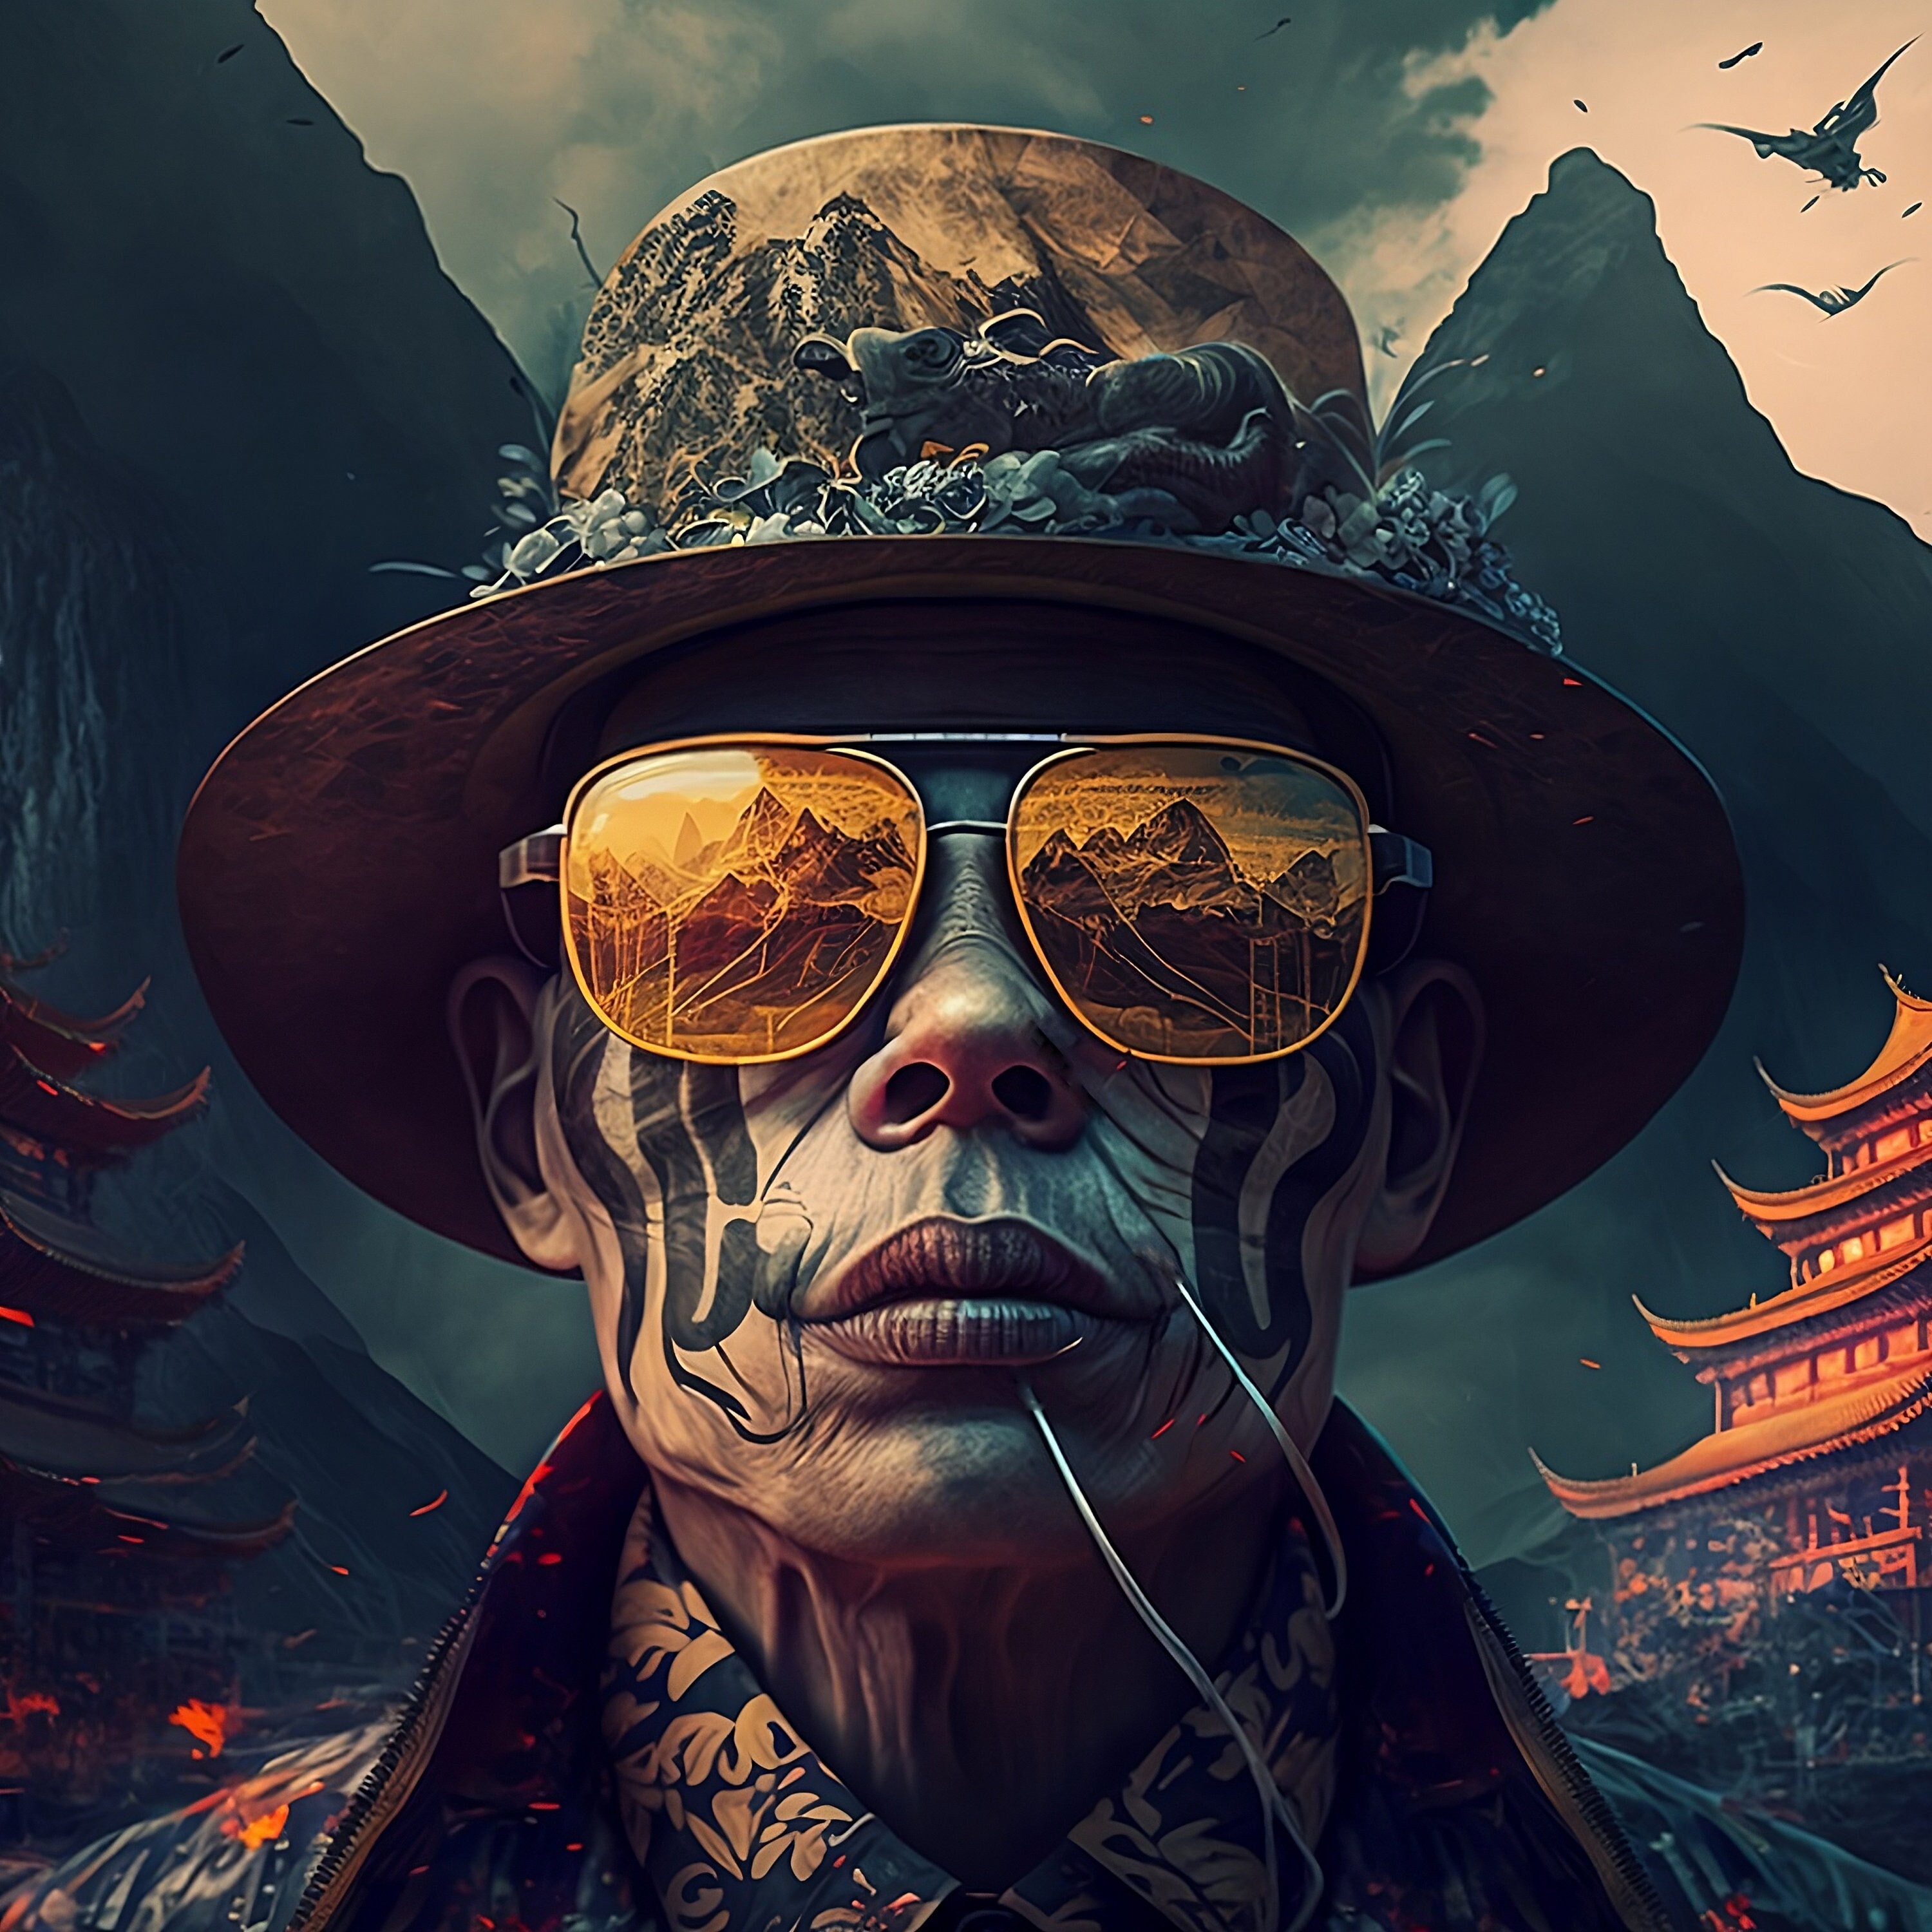 fear and loathing in las vegas Movie TV show Anime Decorative Painting  Canvas Poster Wall Art Living Room Posters Bedroom - AliExpress